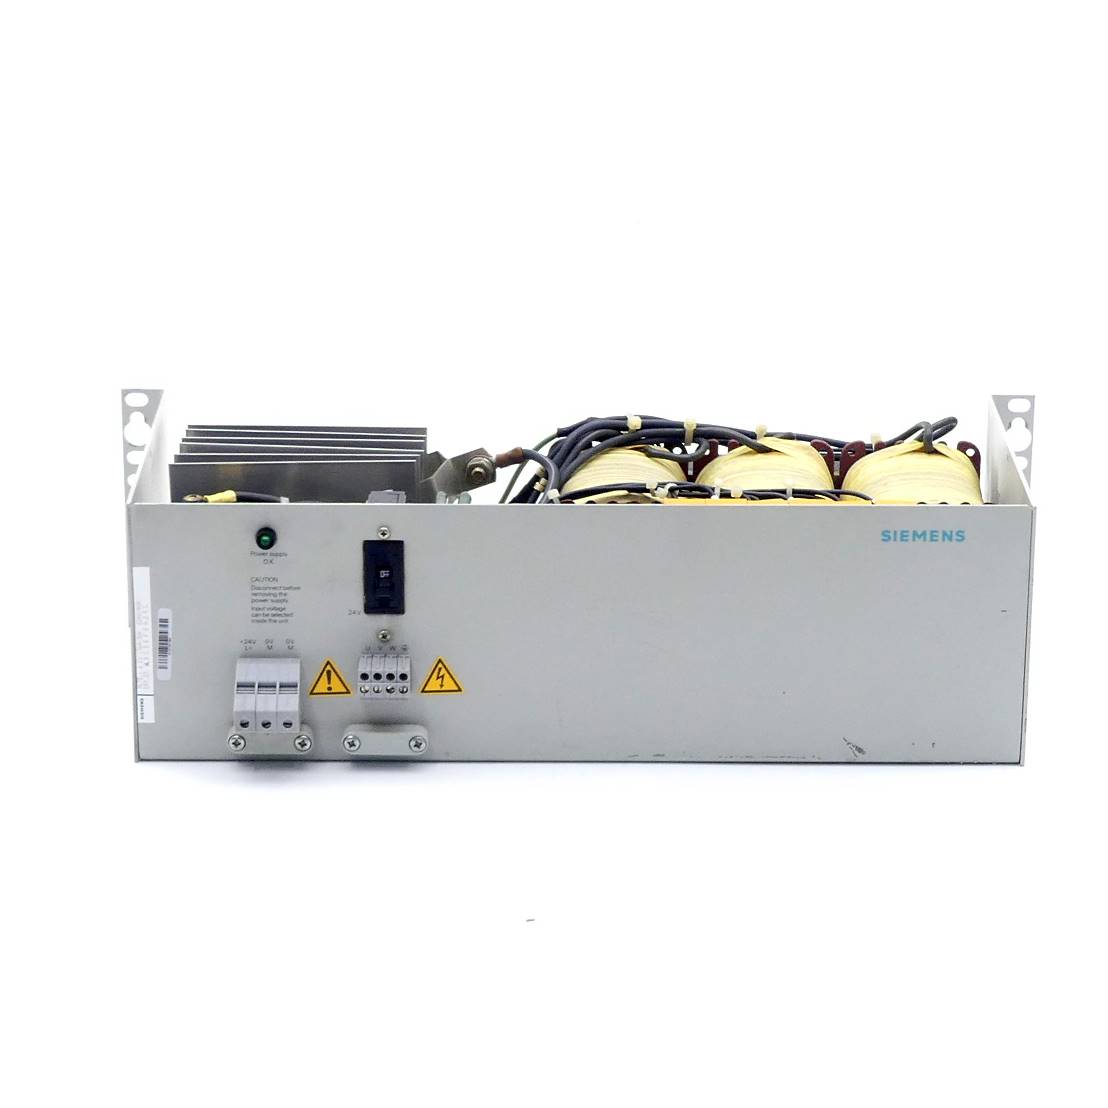 Load power supply 